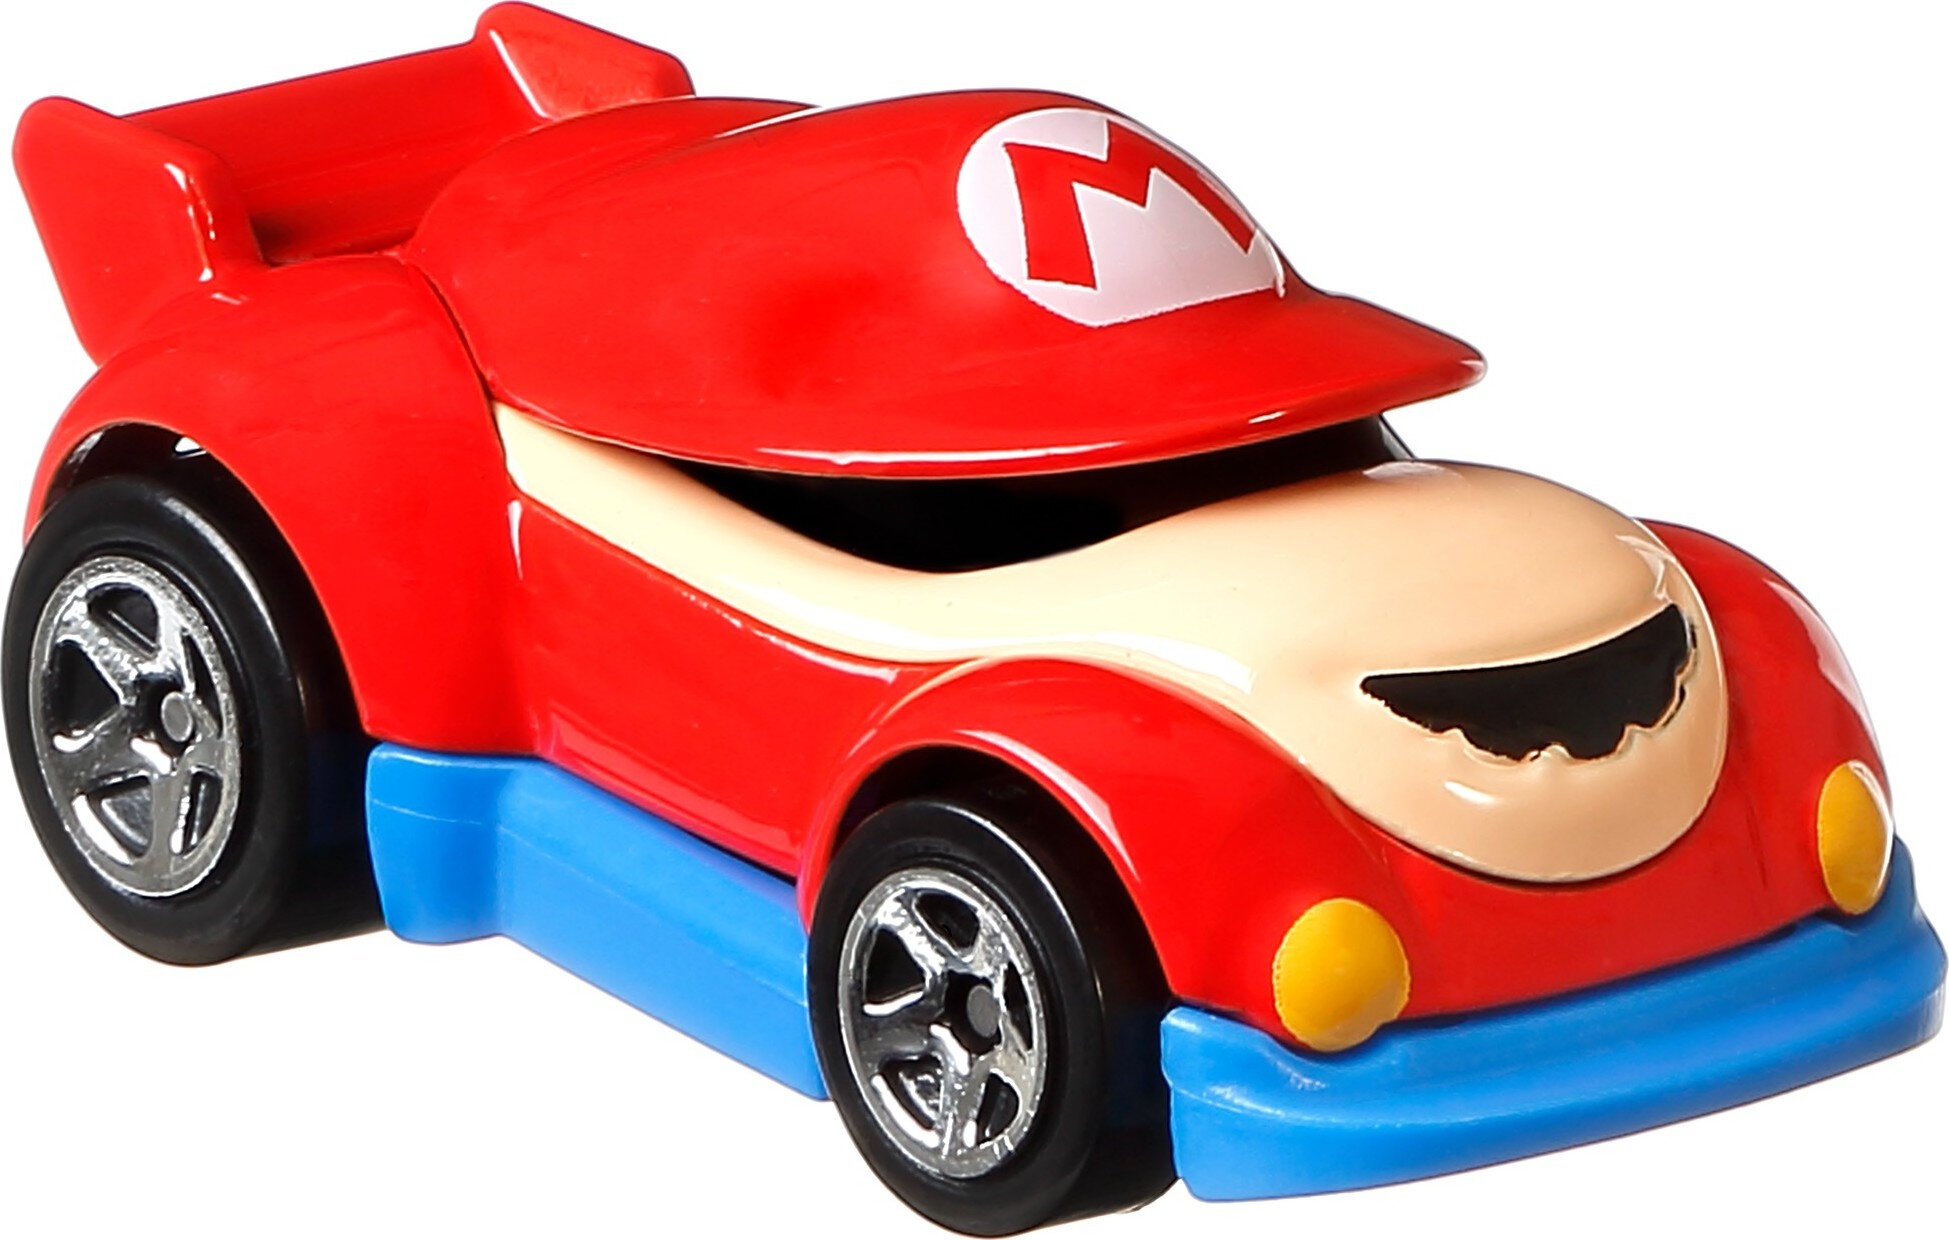 Buy Hot Wheels Super Mario Character Car 5 Pack Online At Lowest Price In India 620906480 3635